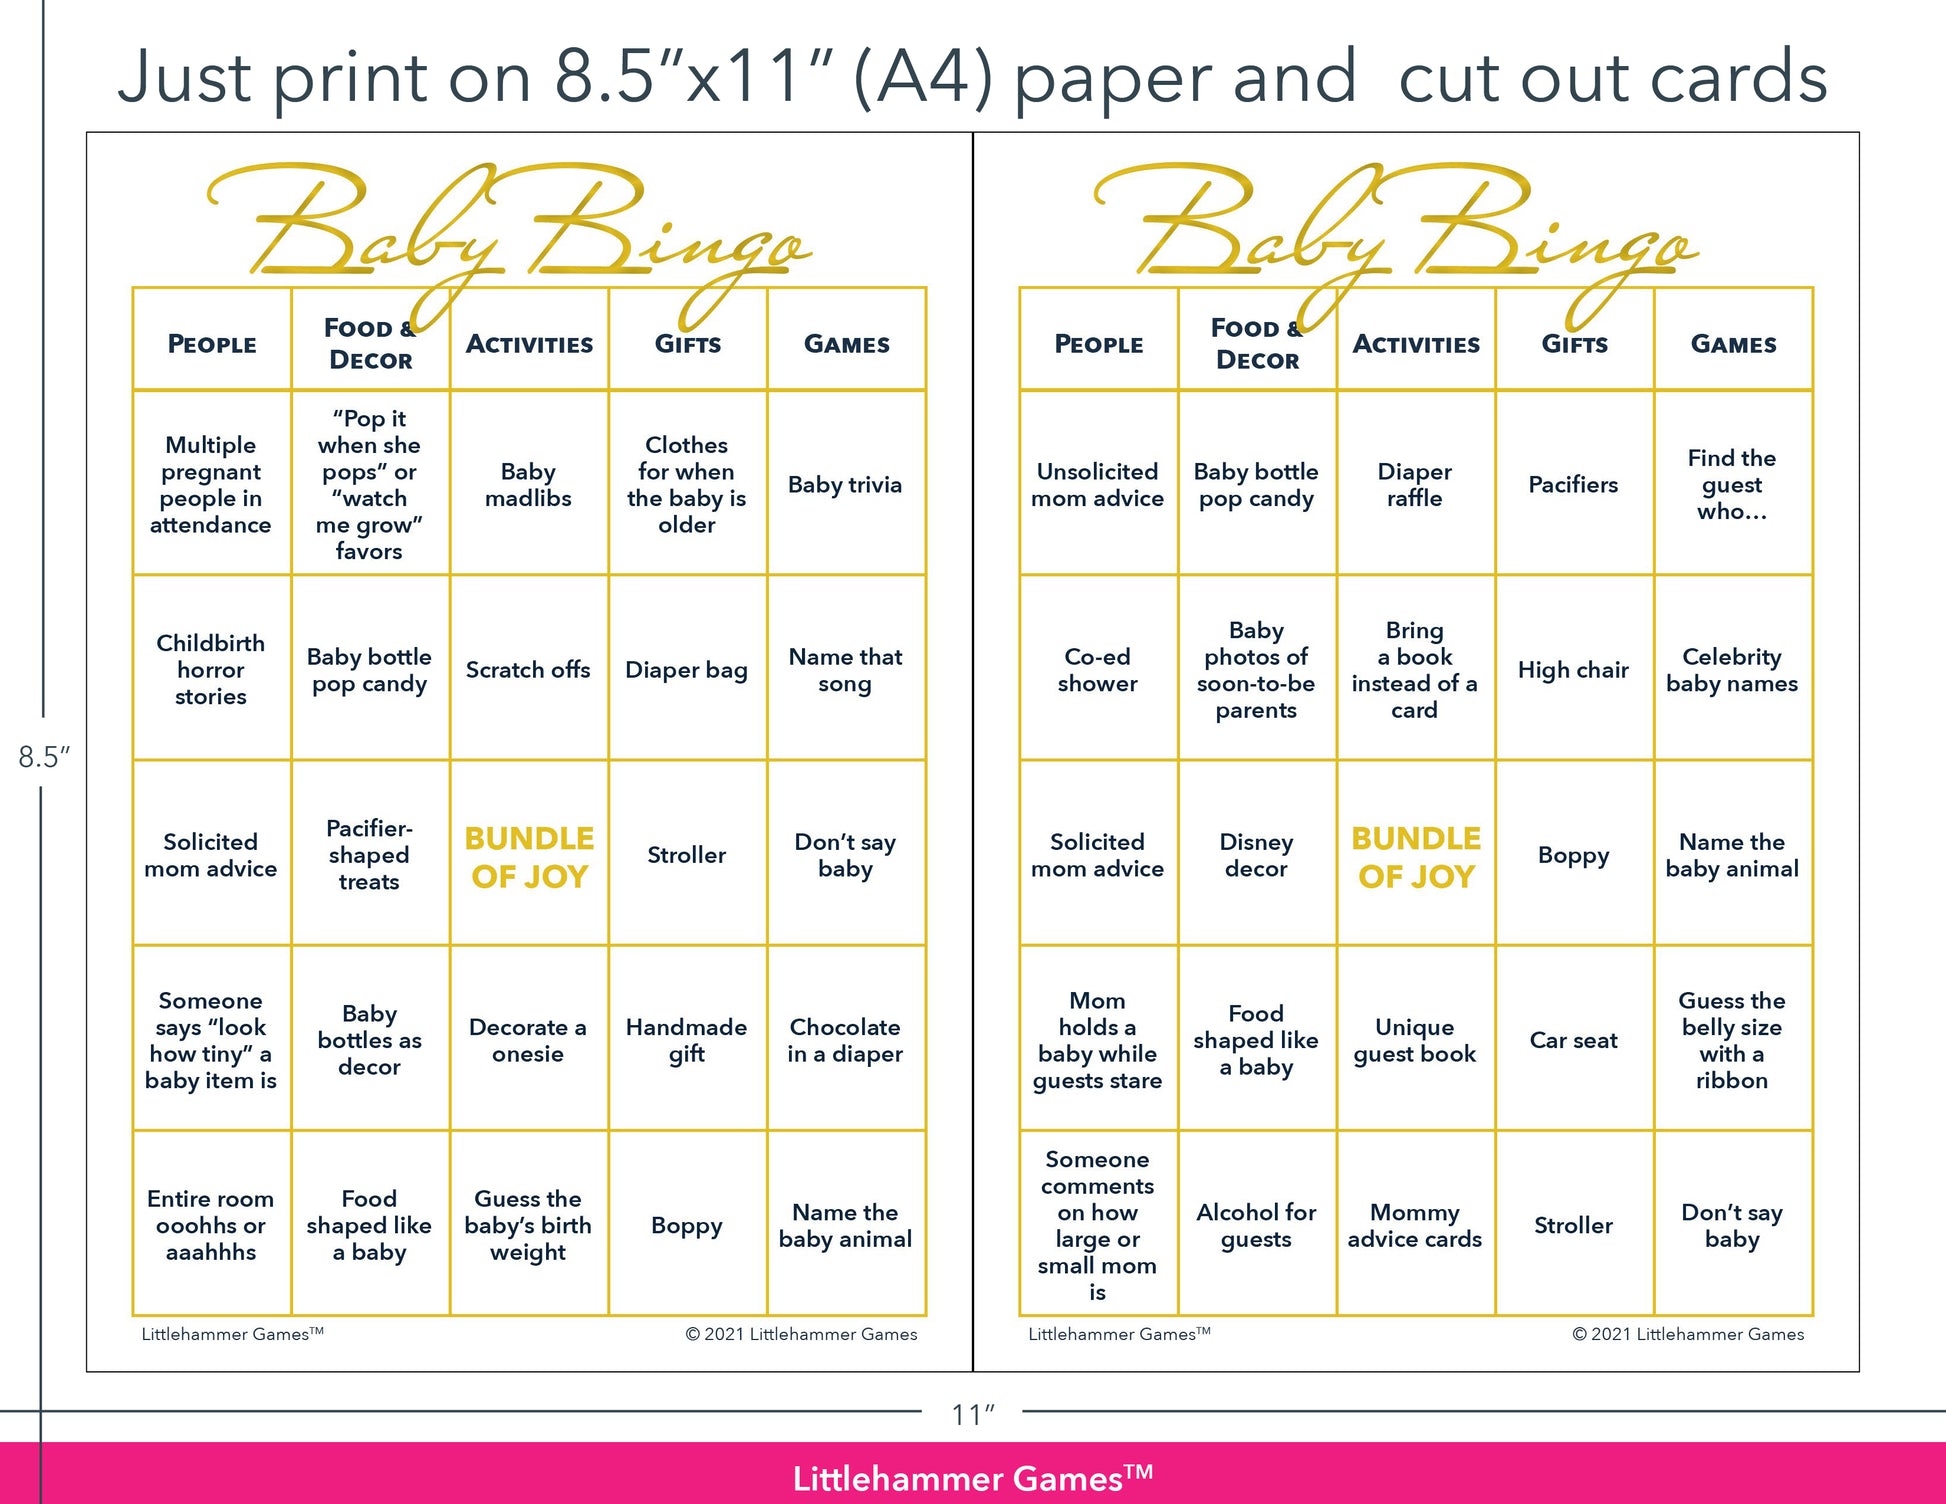 Gold and white Baby Bingo game cards with printing instructions